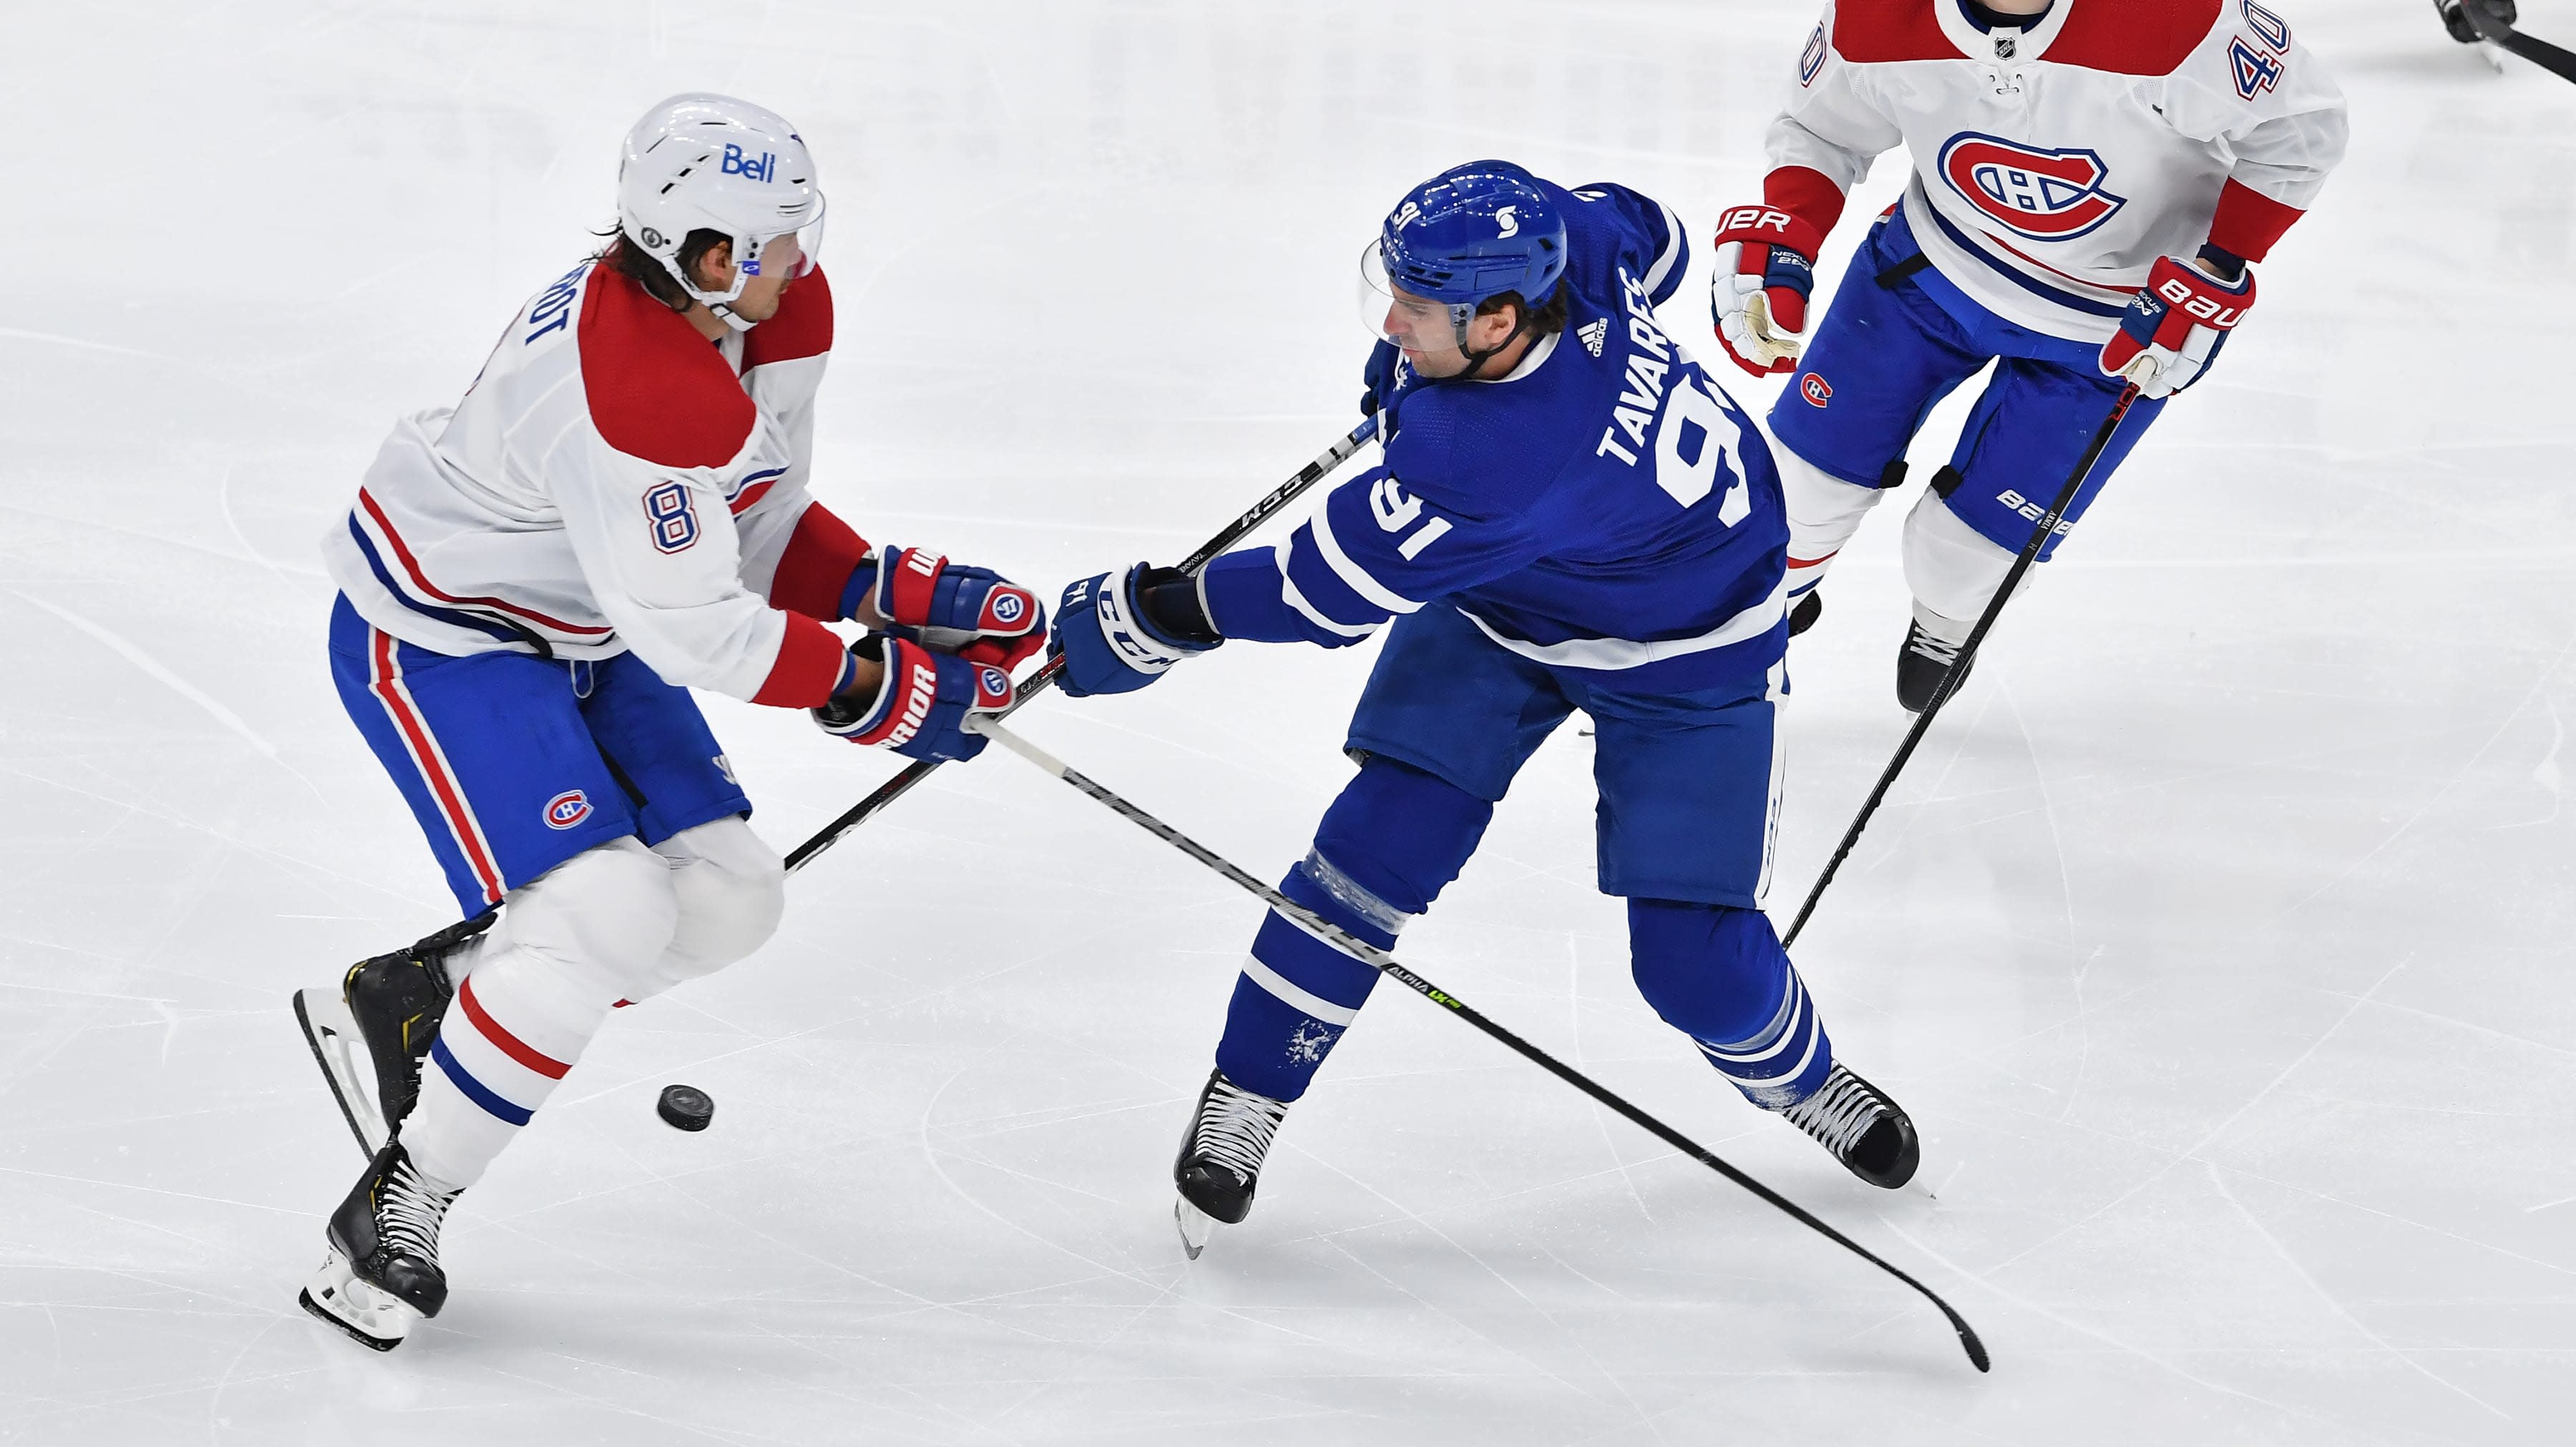 Leafs' Tavares conscious, communicating after being stretchered off against  Habs